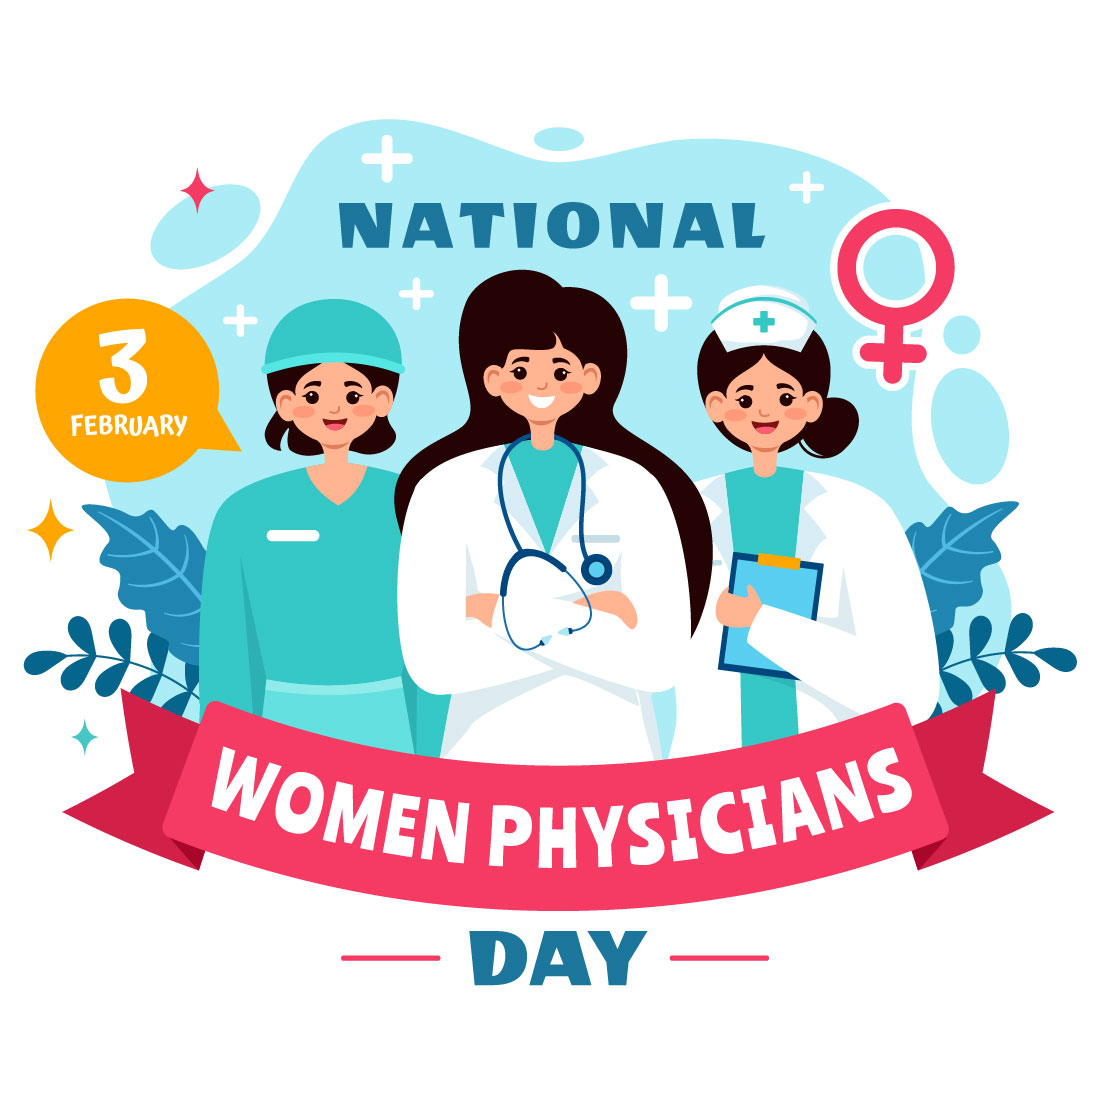 12 National Women Physicians Day Illustration cover image.